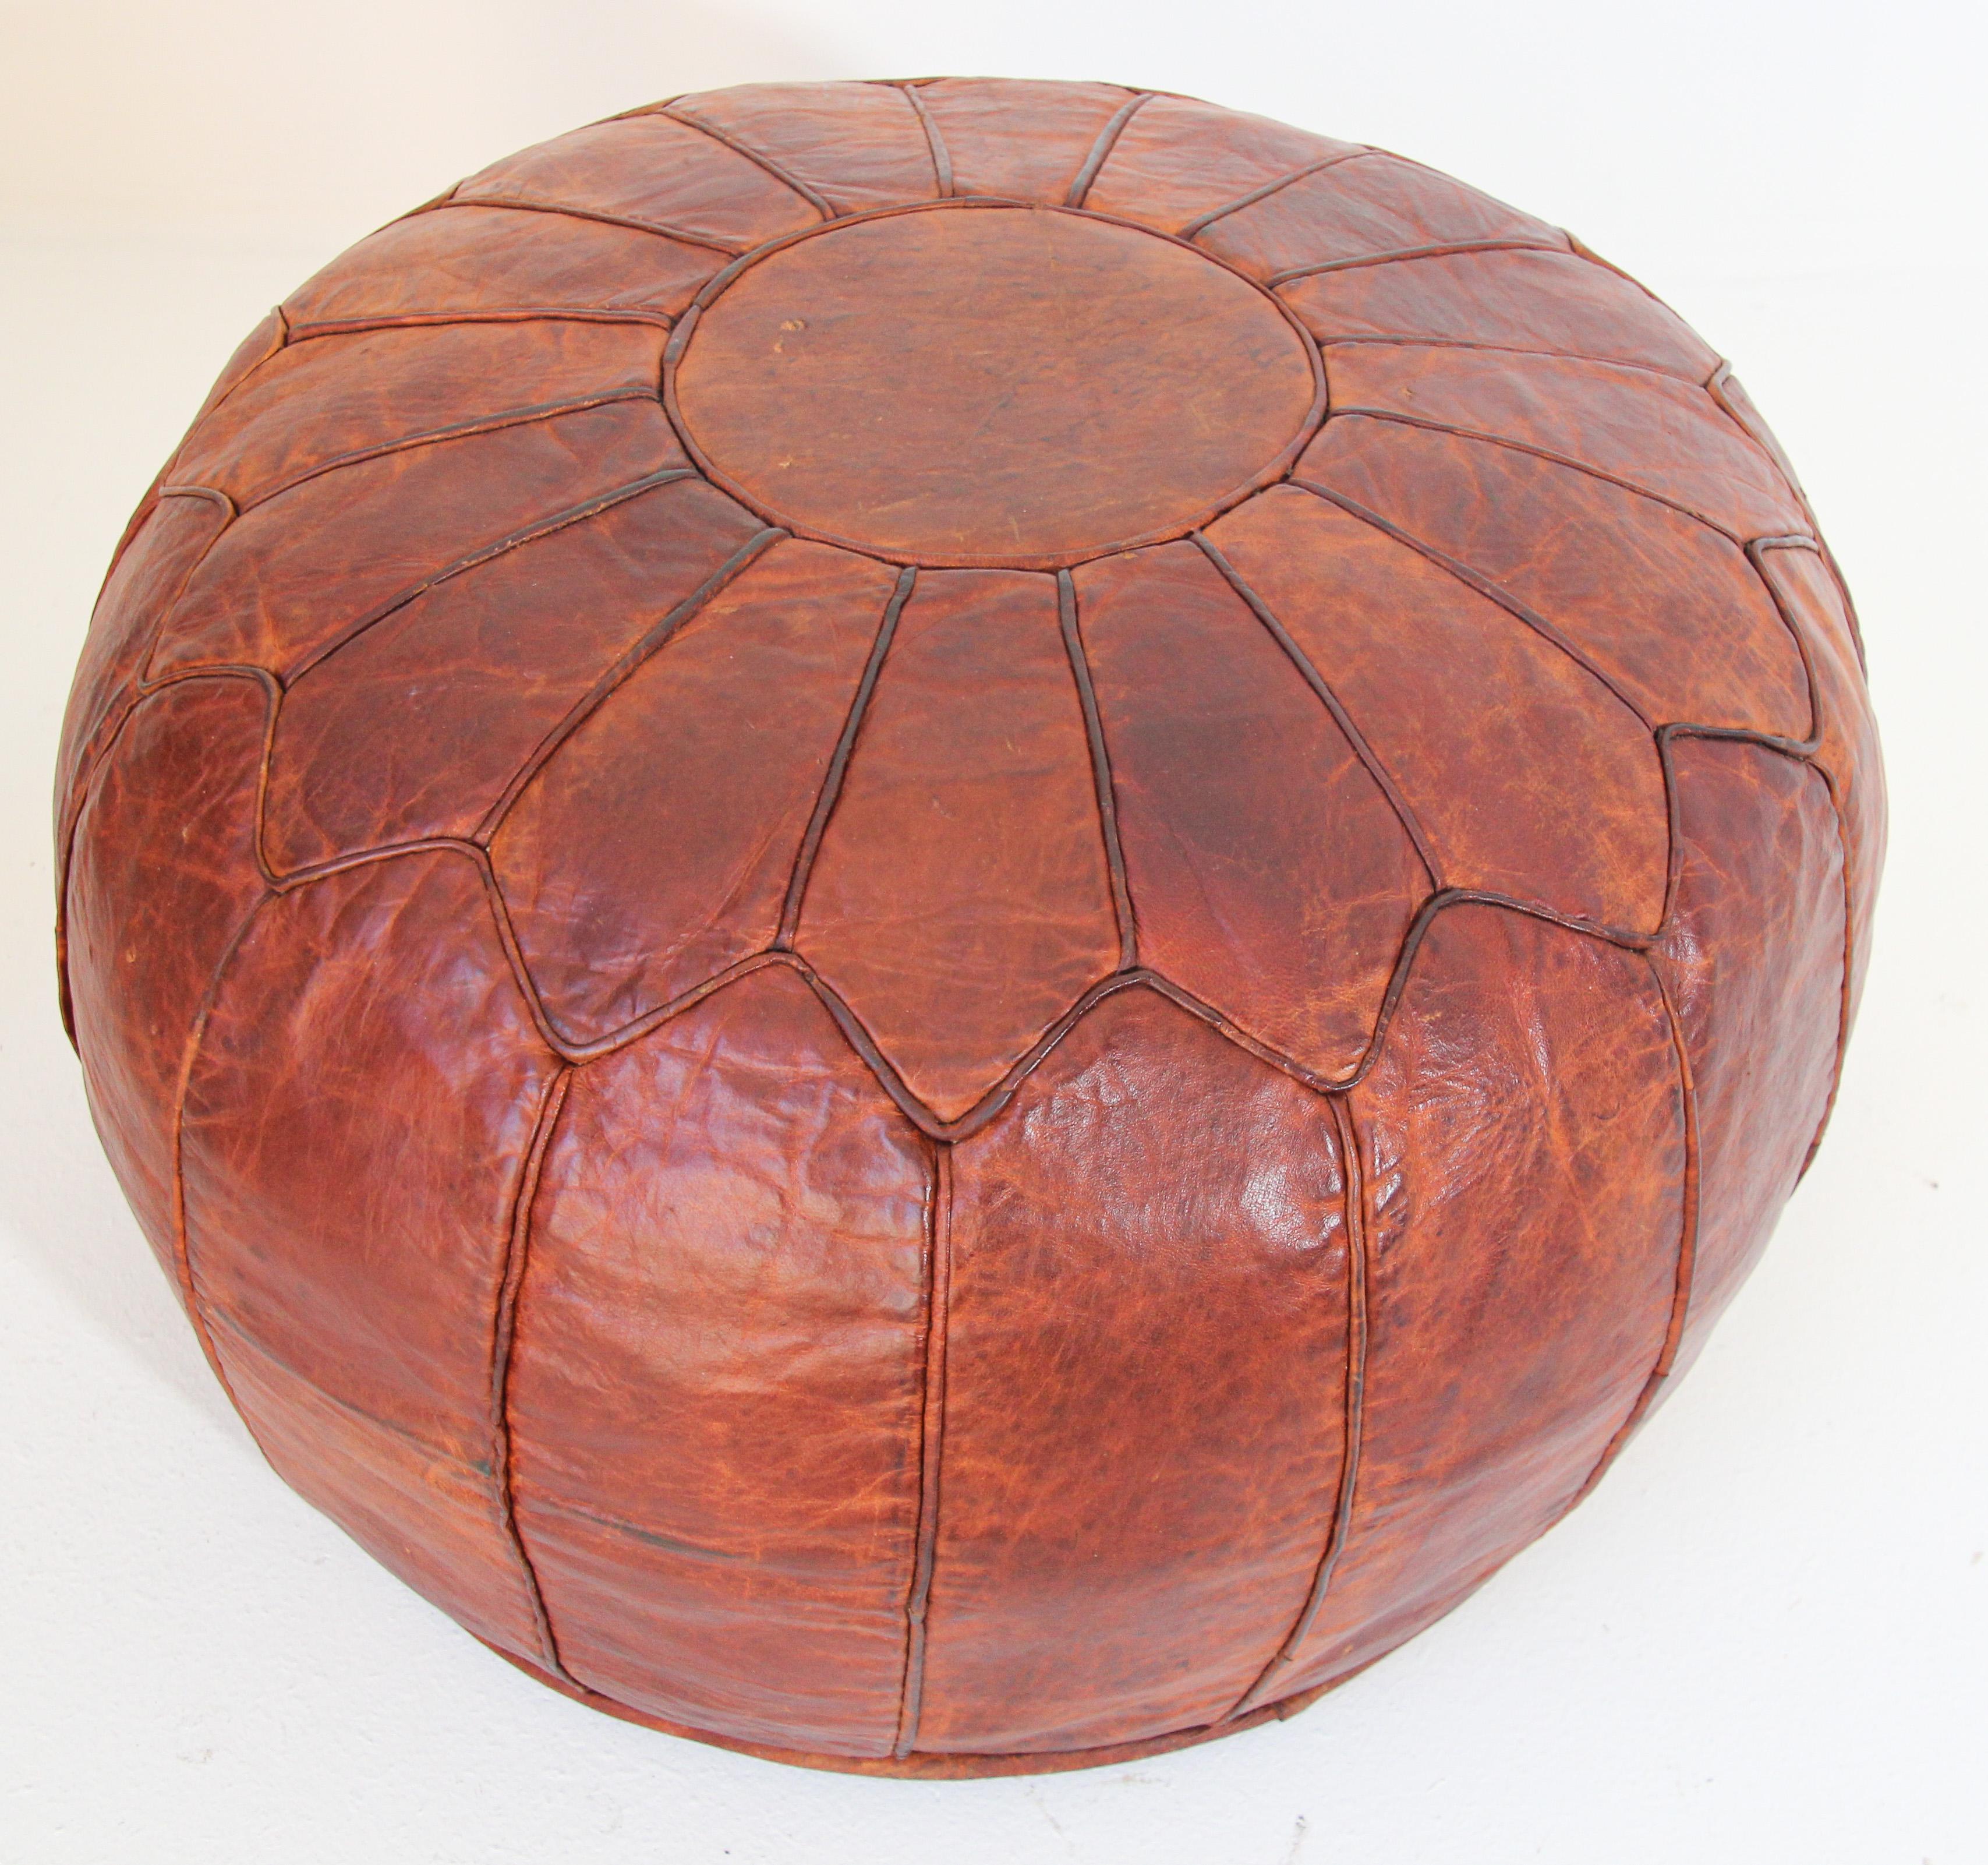 Large vintage round Moroccan leather pouf, handcrafted in brown camel leather.
Hand tooled leather stool ottoman handcrafted by Moroccan artisans in Marrakech, Morocco.

    